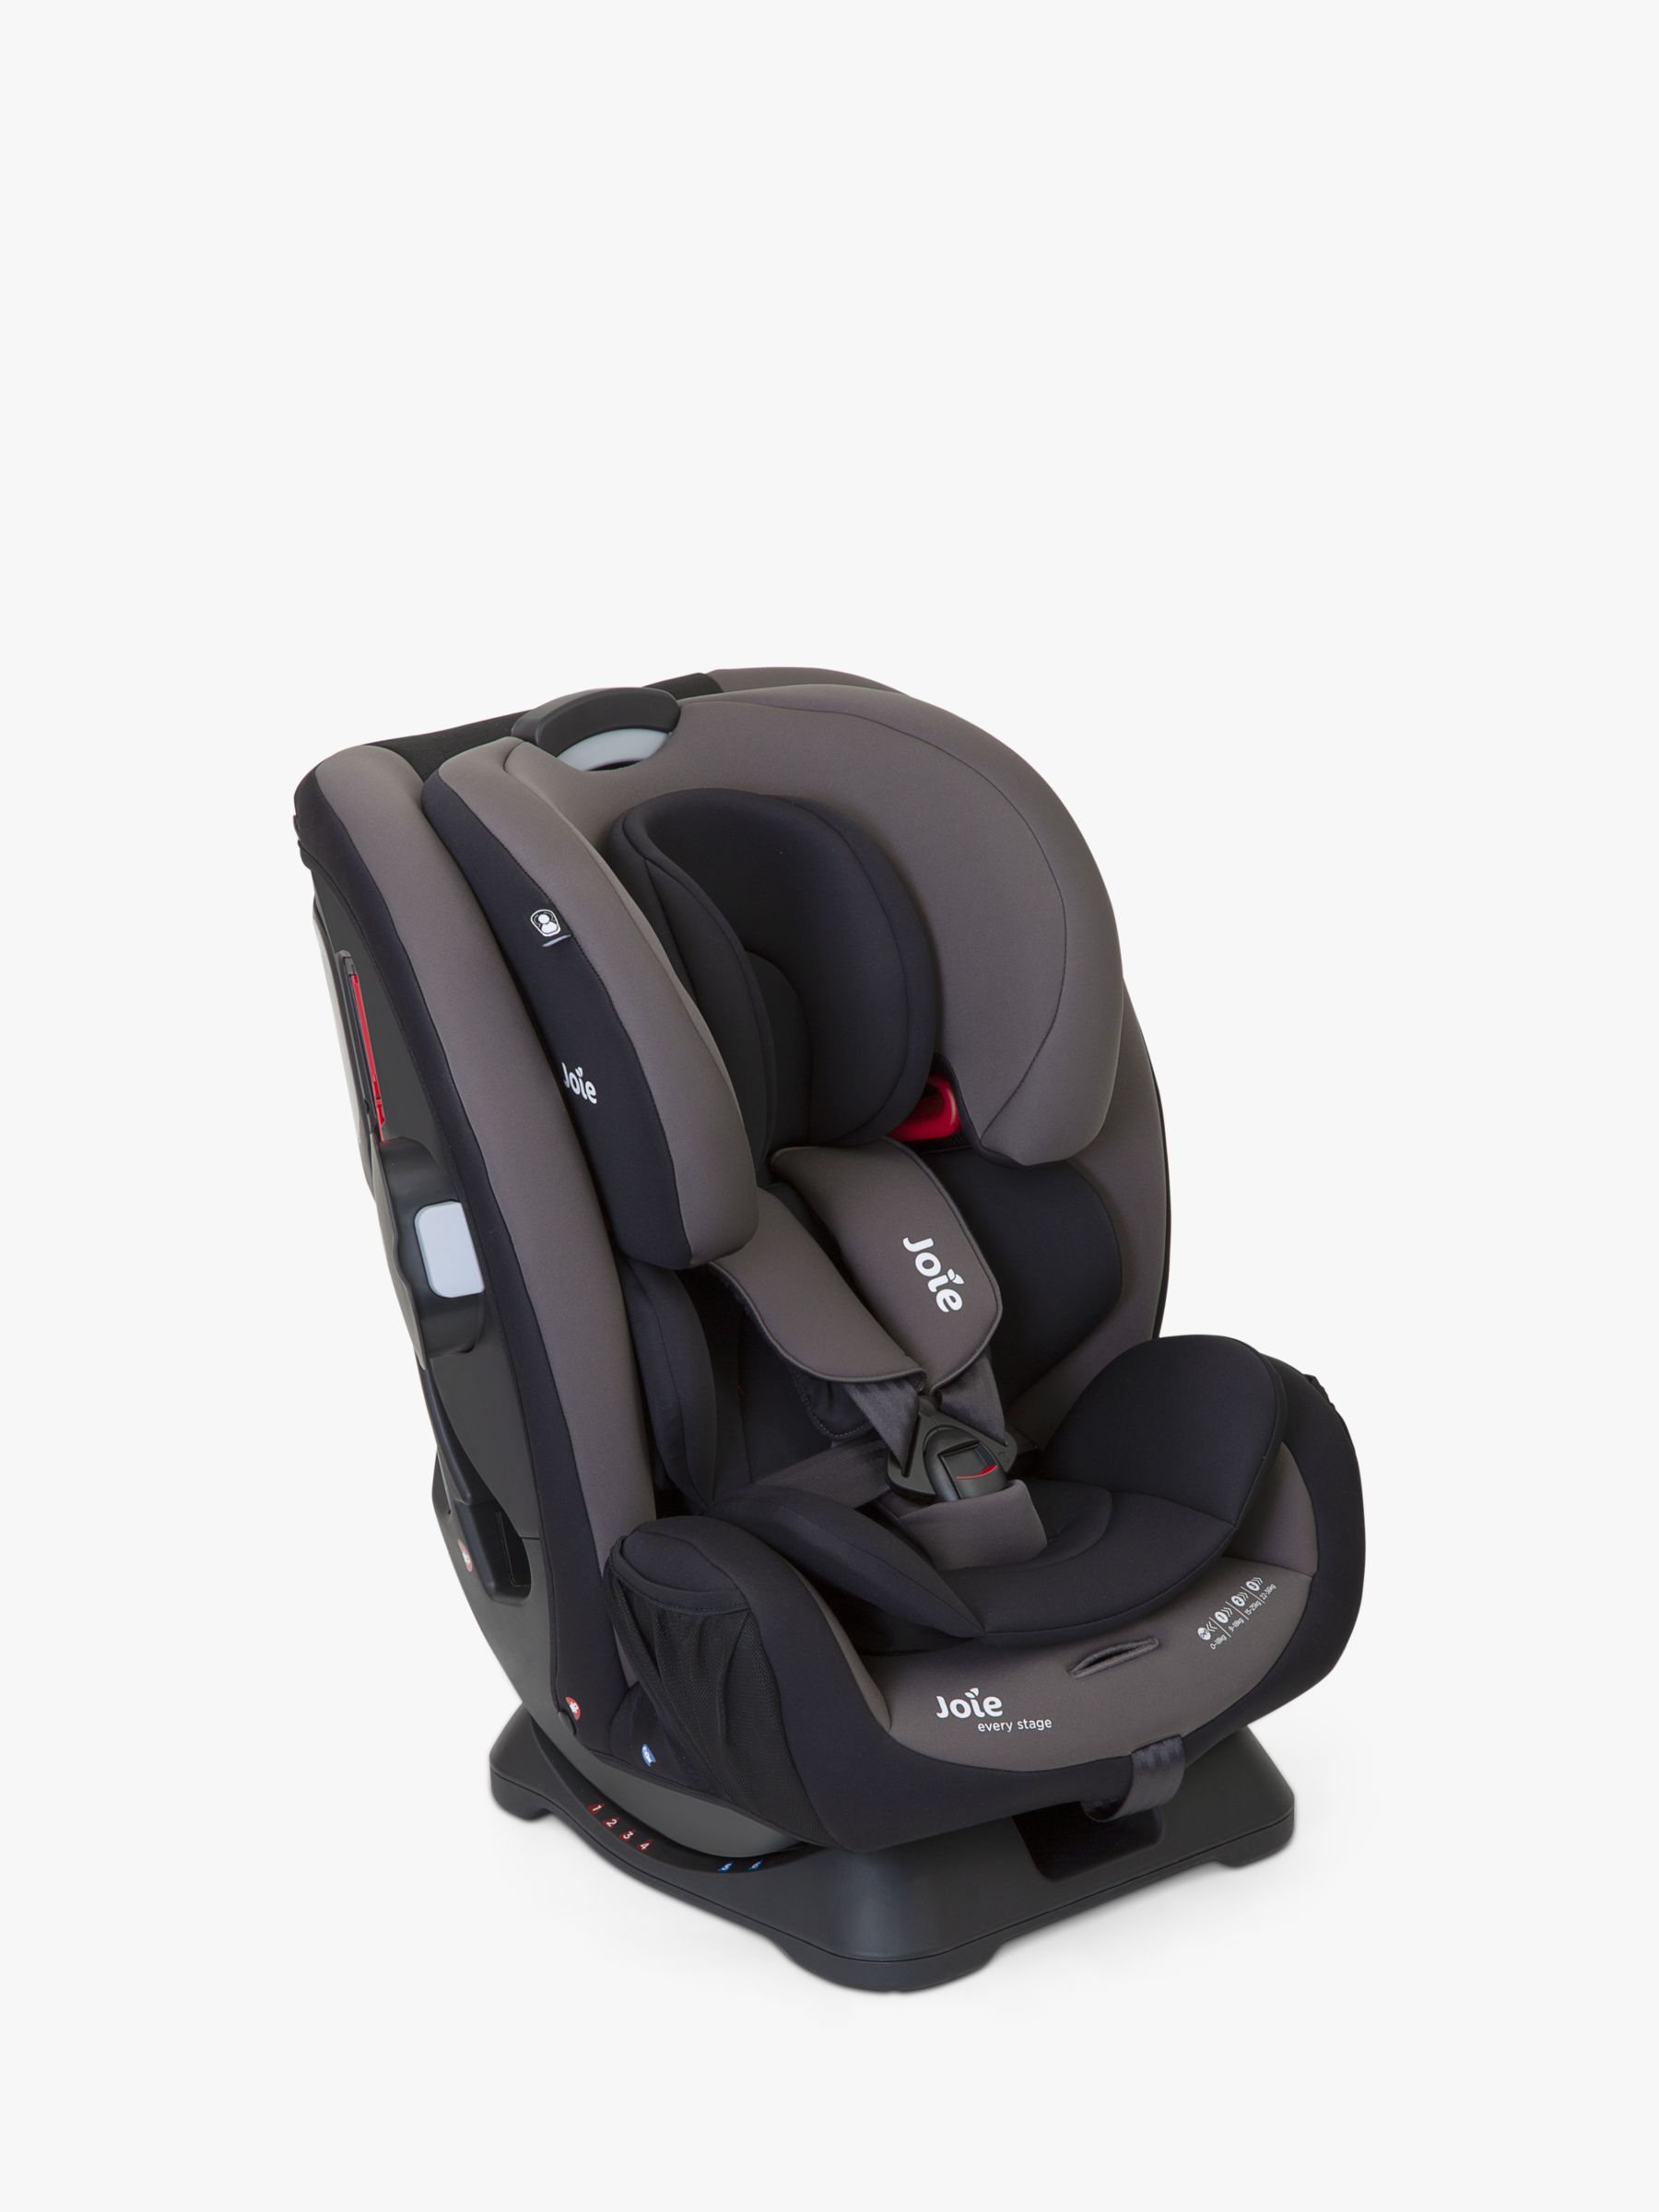 How To Fix Joie Stages Car Seat Installation | Brokeasshome.com